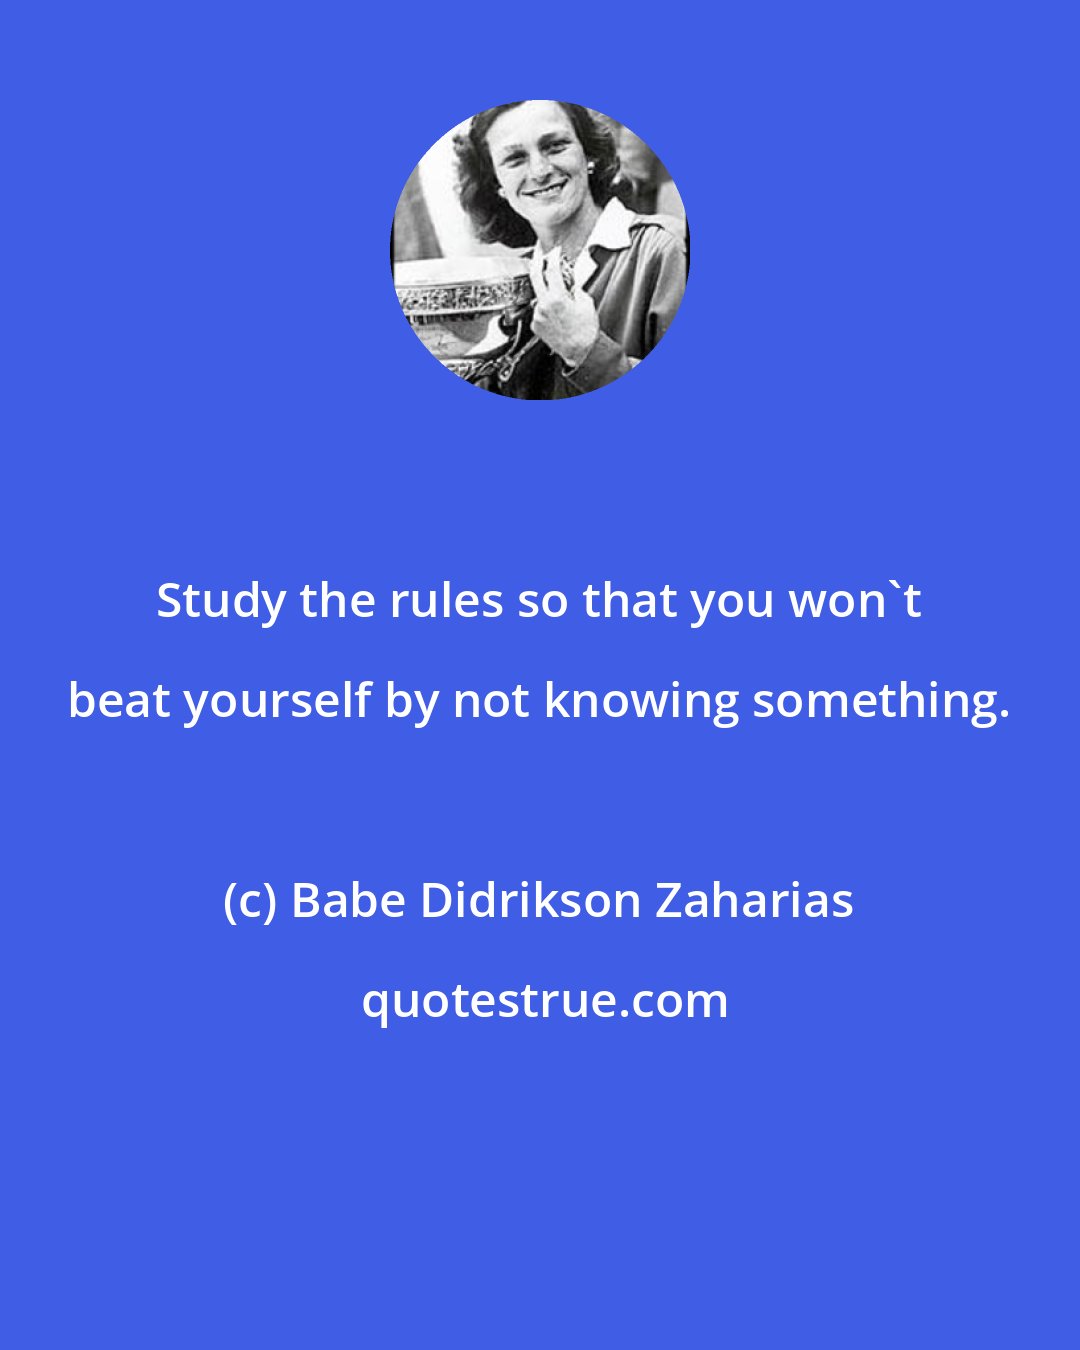 Babe Didrikson Zaharias: Study the rules so that you won't beat yourself by not knowing something.